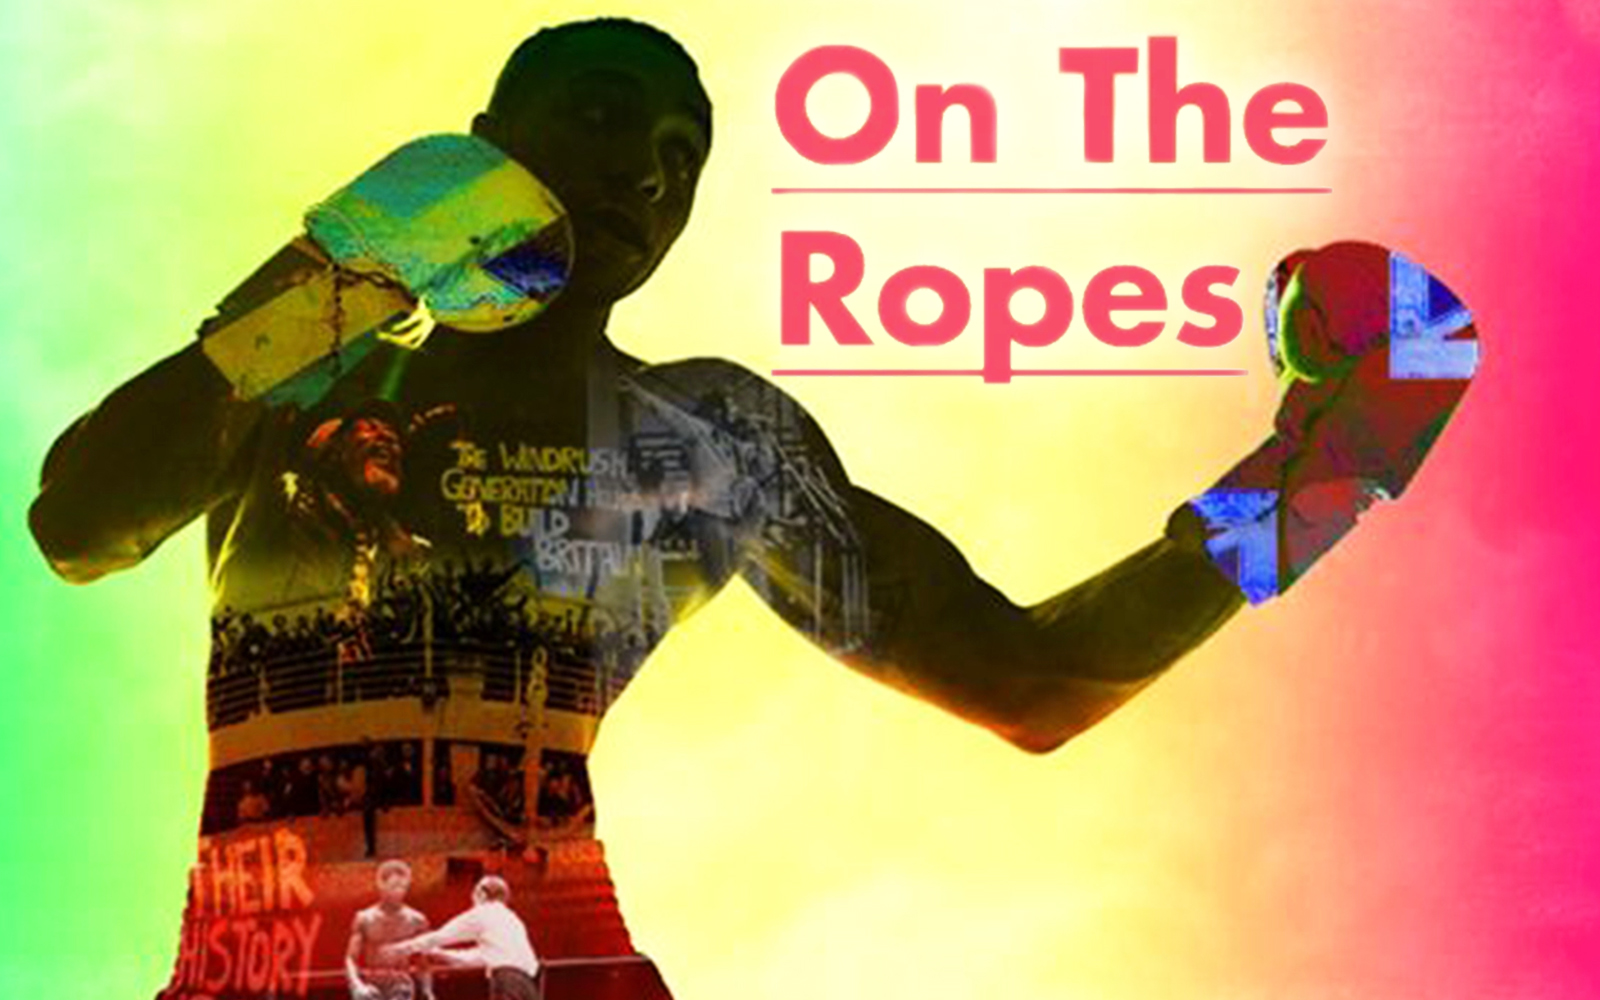 Image of On the Ropes